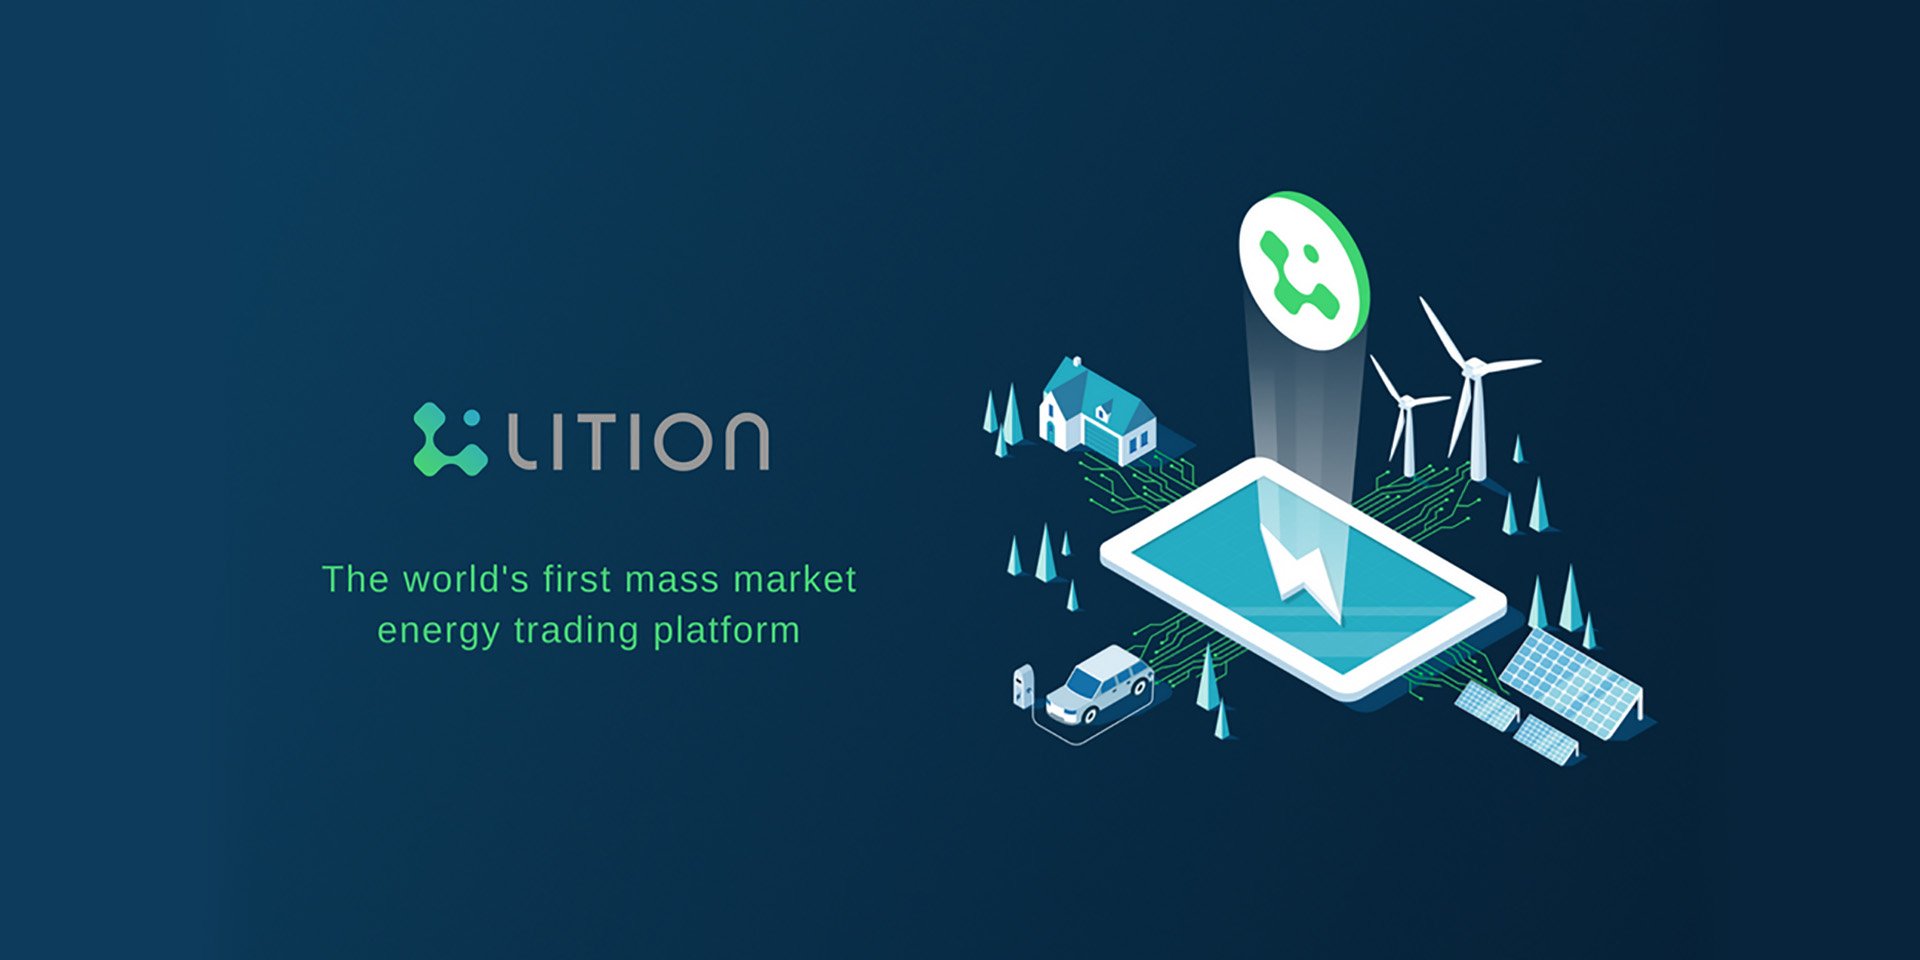 Lition is The World’s First Operational Peer-to-Peer Energy Trading Platform